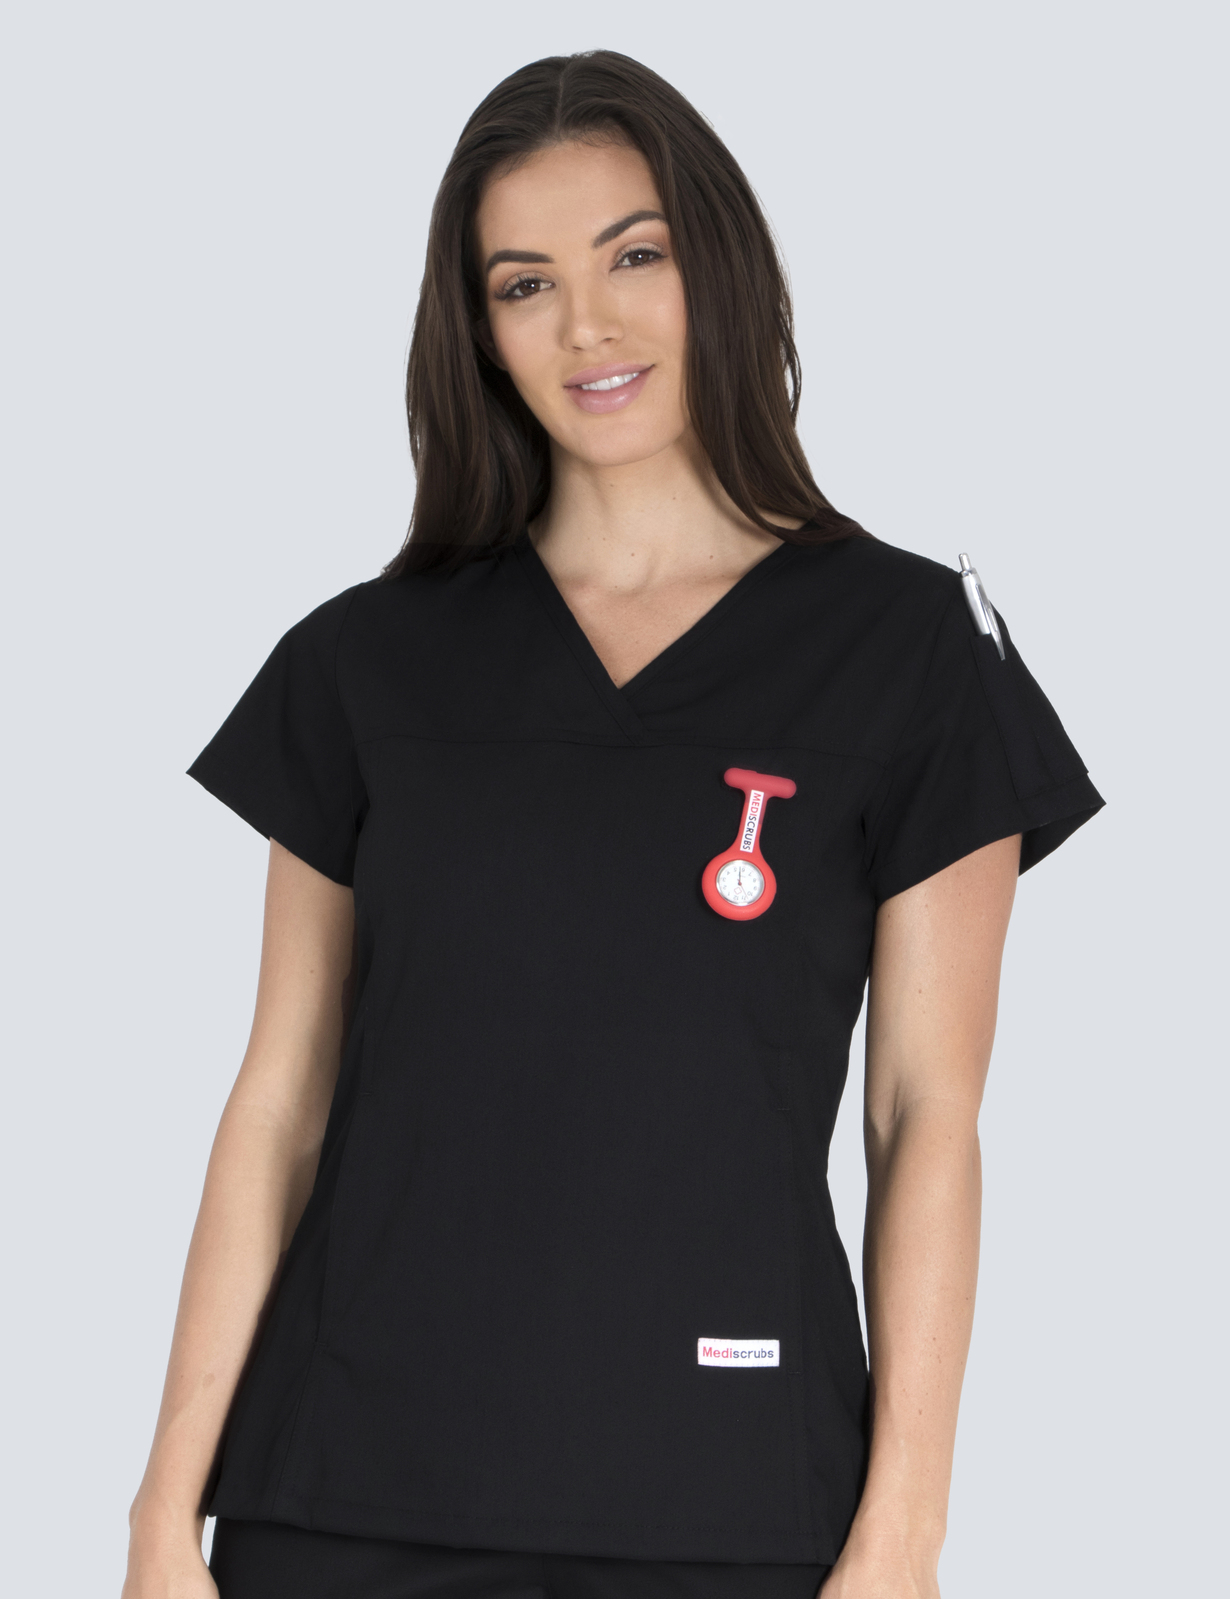 North Shore Private Hospital Radiographer Uniform Top Only Bundle (Women's Fit Solid  Top in Black + Logo)